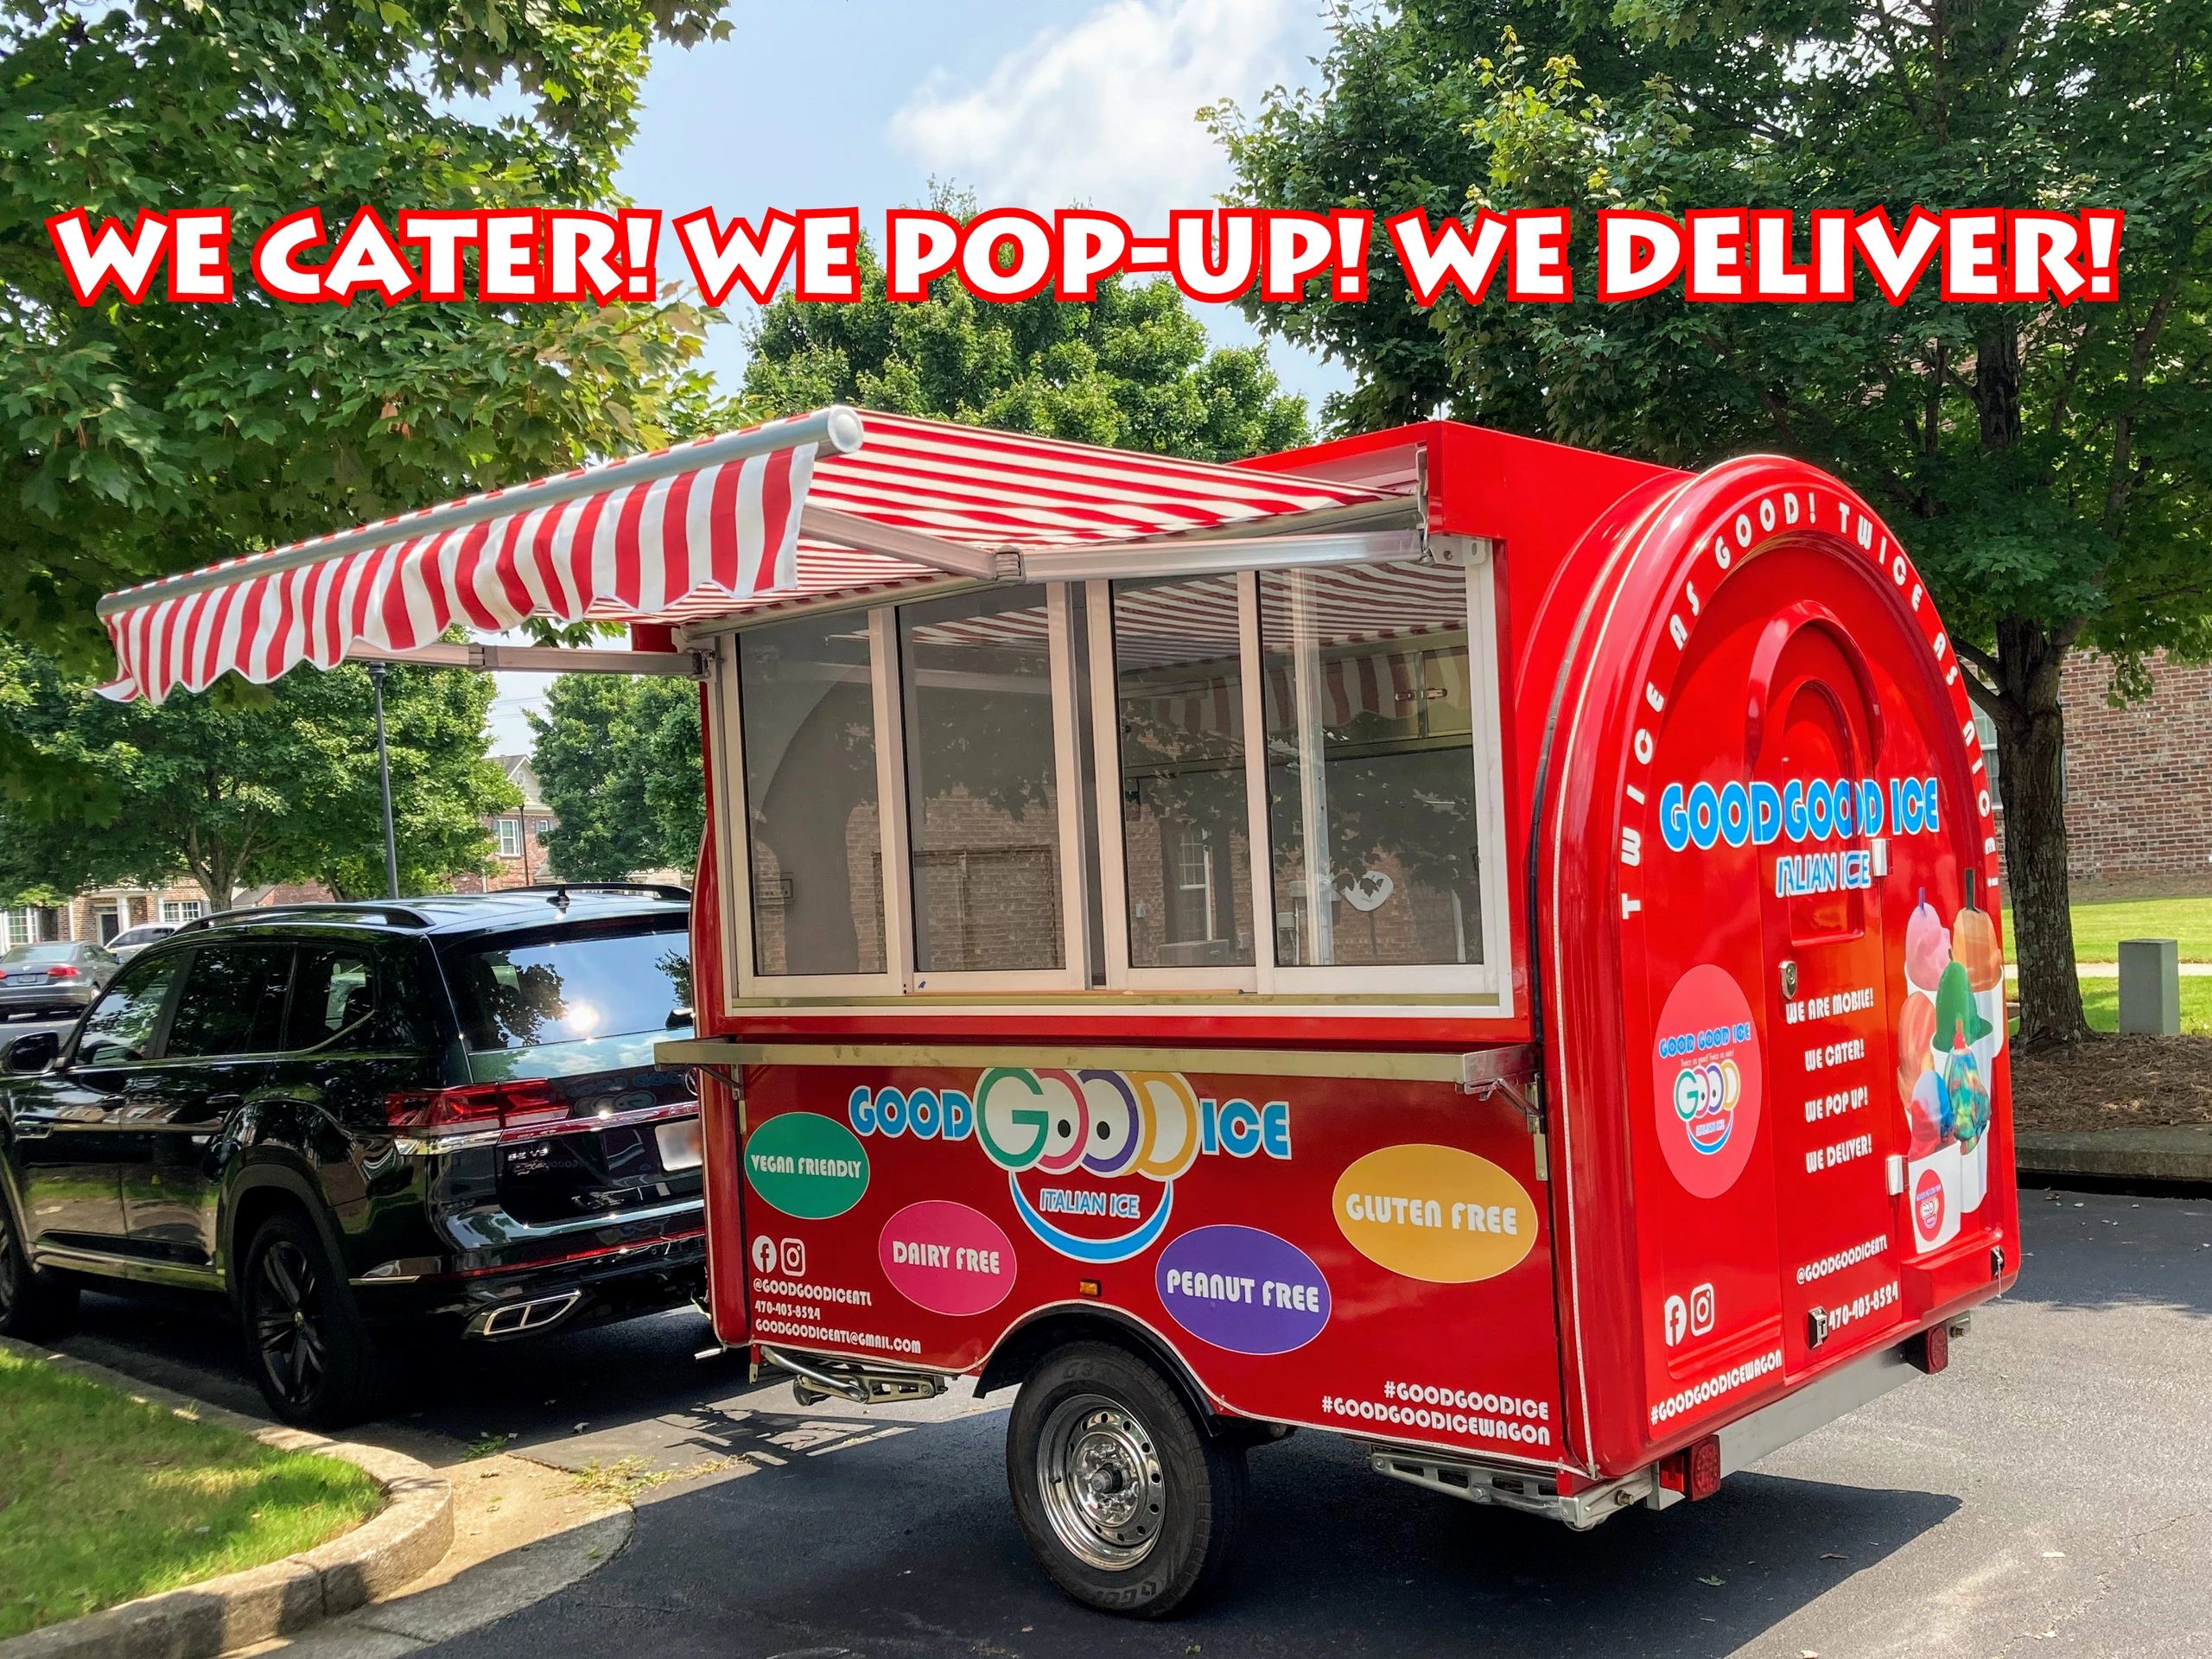 message reads: we cater! we pop-up! we deliver! Colorful red italian ice trailer below.